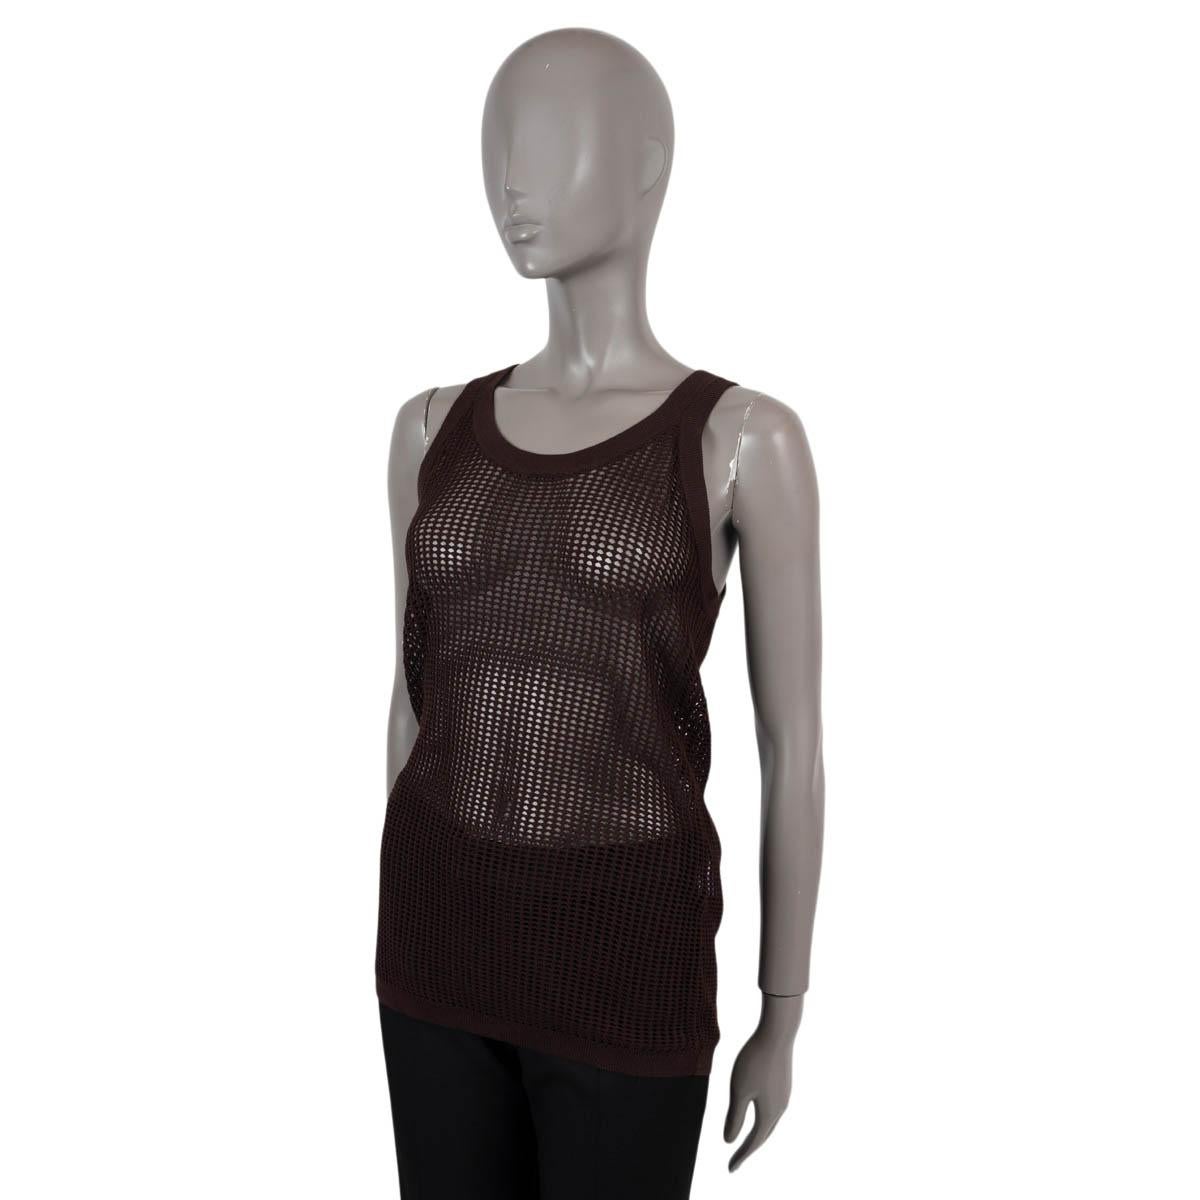 100% authentic Victoria Beckham open knit tank top in dark brown viscose (70%) and cotton (30%). Features a scoop neck and racerback. Has been worn and is in excellent condition.

2023 Spring/Summer

Measurements
Tag Size	M
Size	M
Shoulder